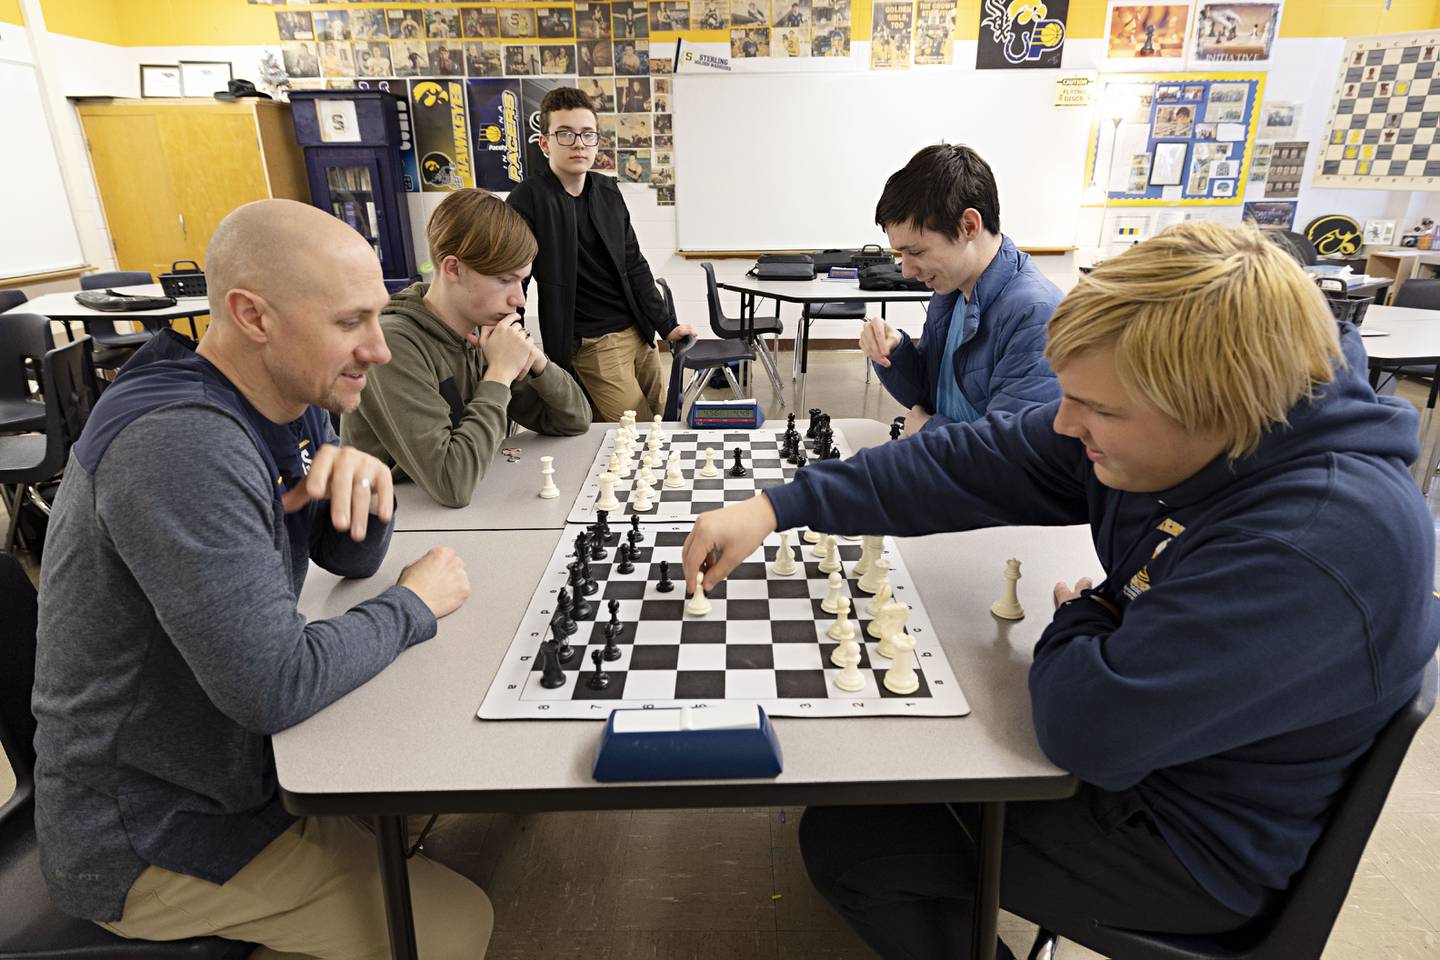 Sterling High School chess instructor Joel Penne plays a team chess game with players Kinnick Kyarsgaard (left), Nate Lobdell and Xander Knowles during an off season activity hour at the school.